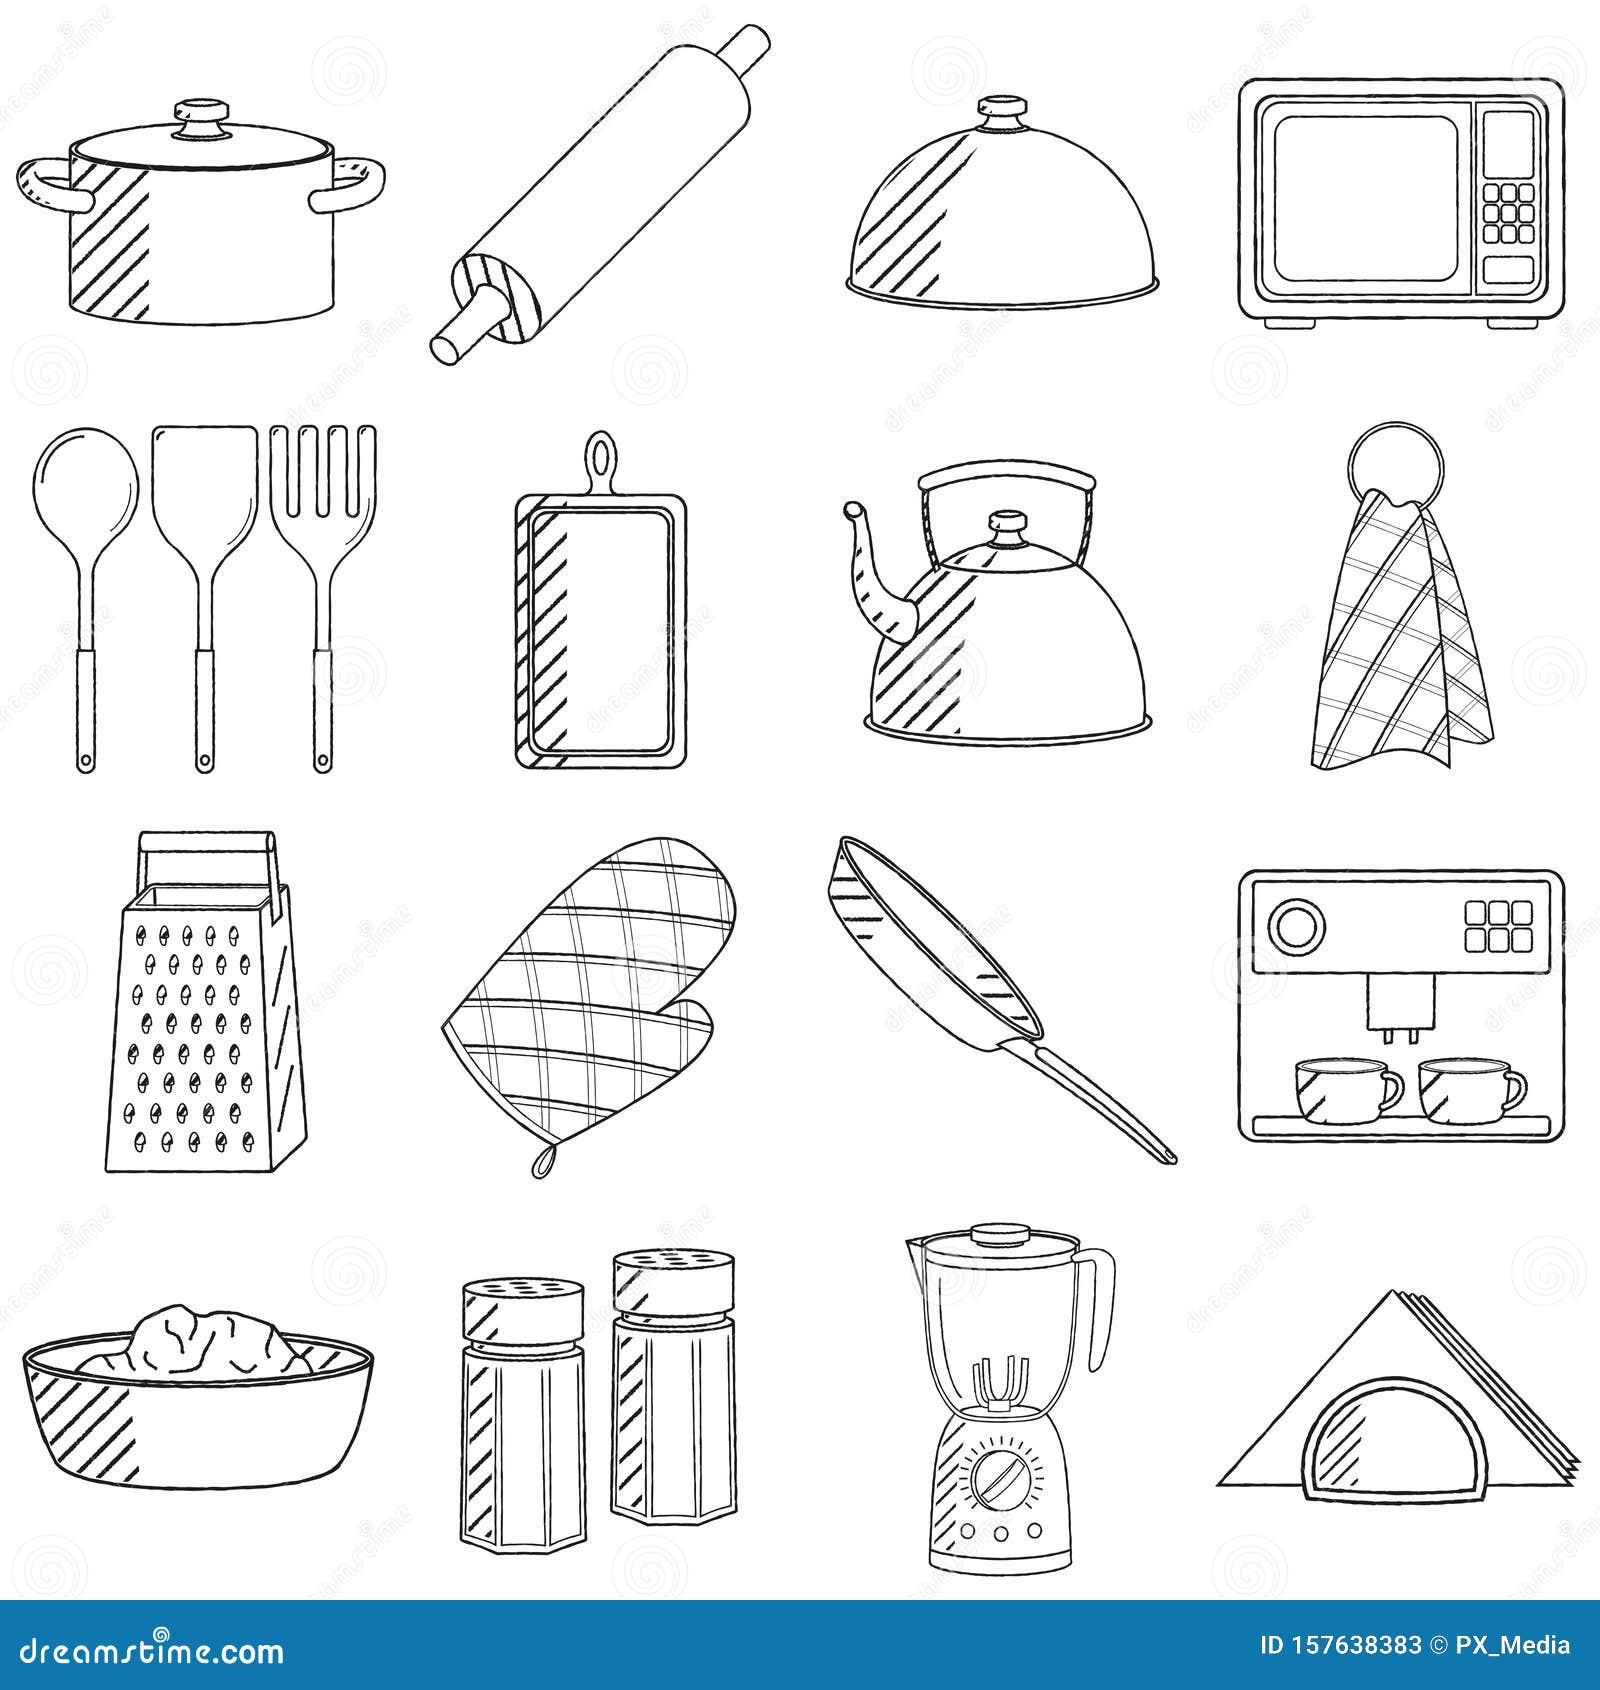 The Kitchen Tool Draw Image For Food Or Cooking Concept, Kitchen, Cooking,  Cup PNG Transparent Image and Clipart for Free Download